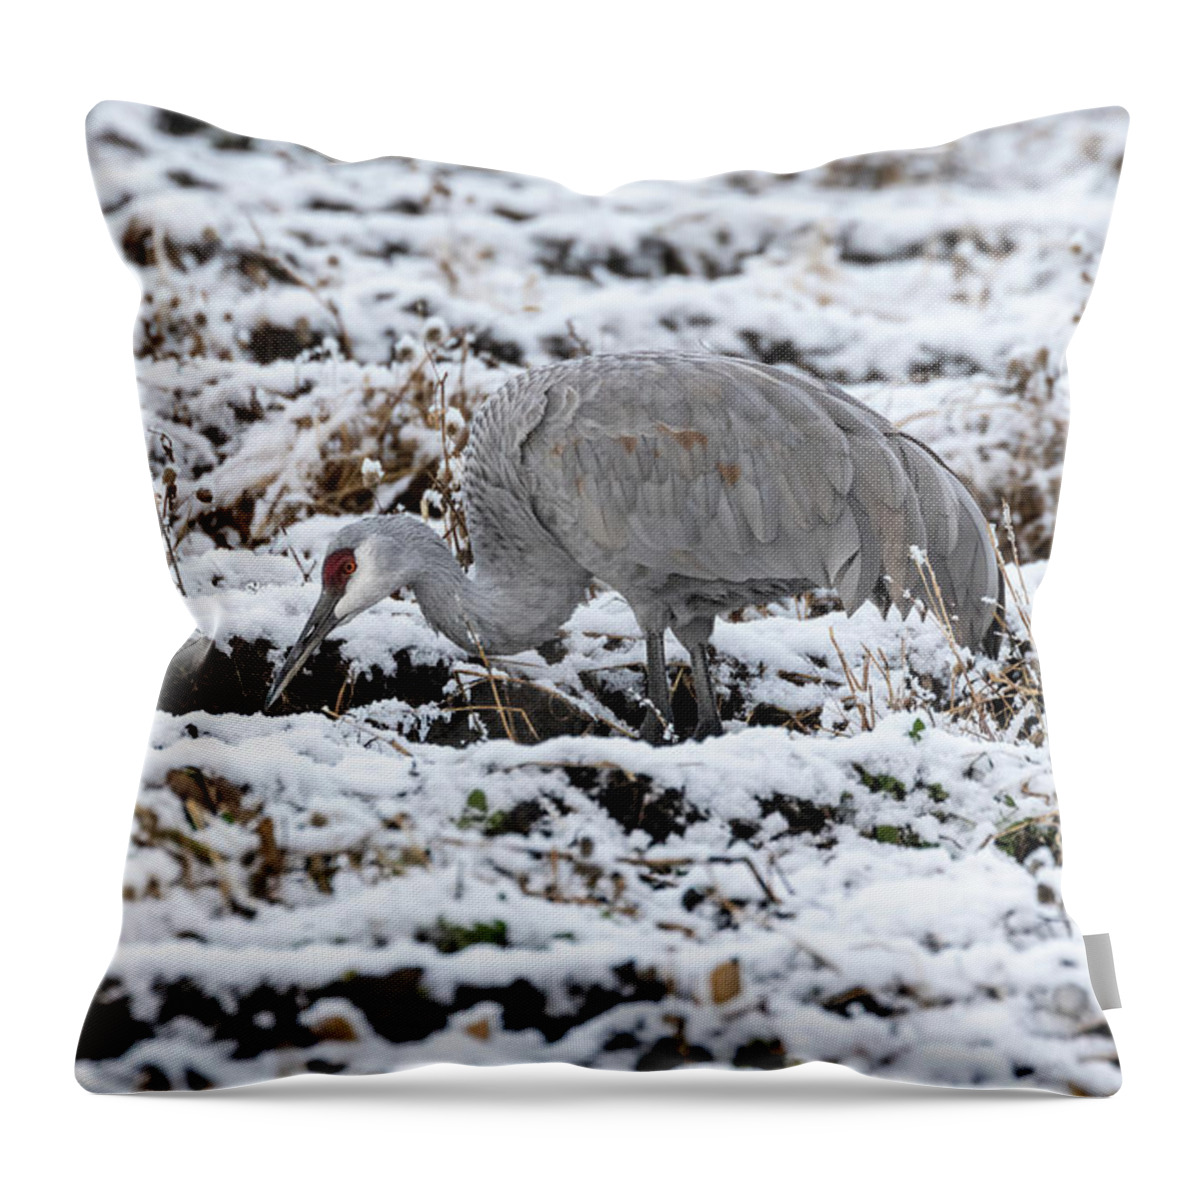 Sandhill Crane Throw Pillow featuring the photograph Sandhill Crane 2019-8 by Thomas Young